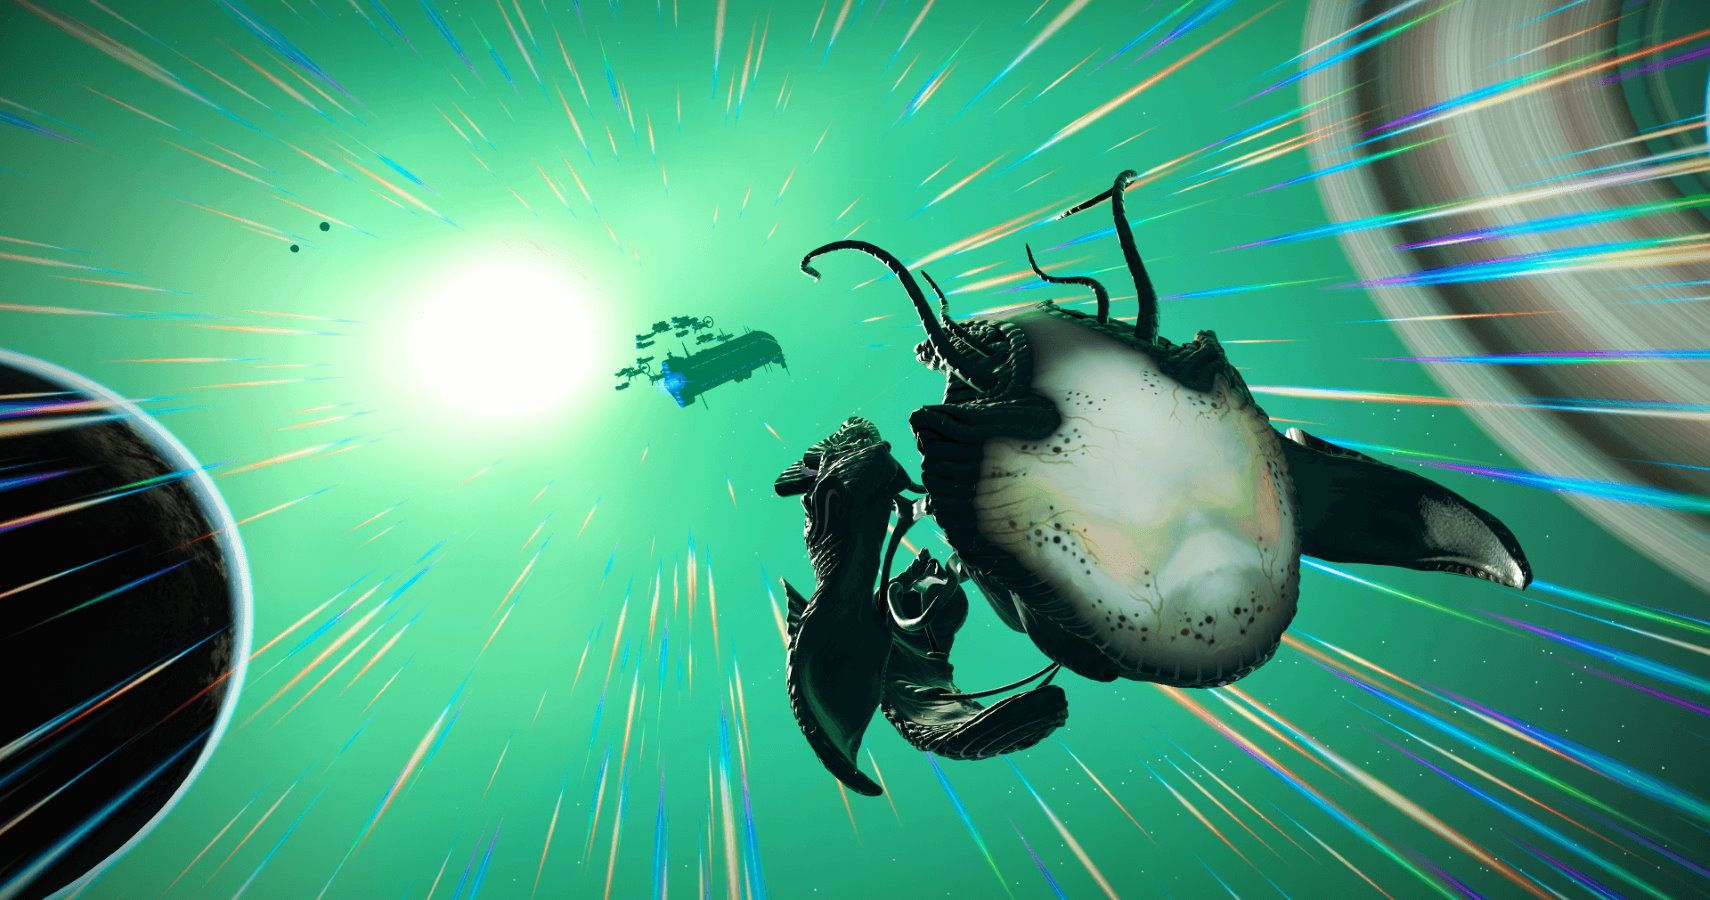 Latest No Man’s Sky Update Adds Living Ships With Organic Tech